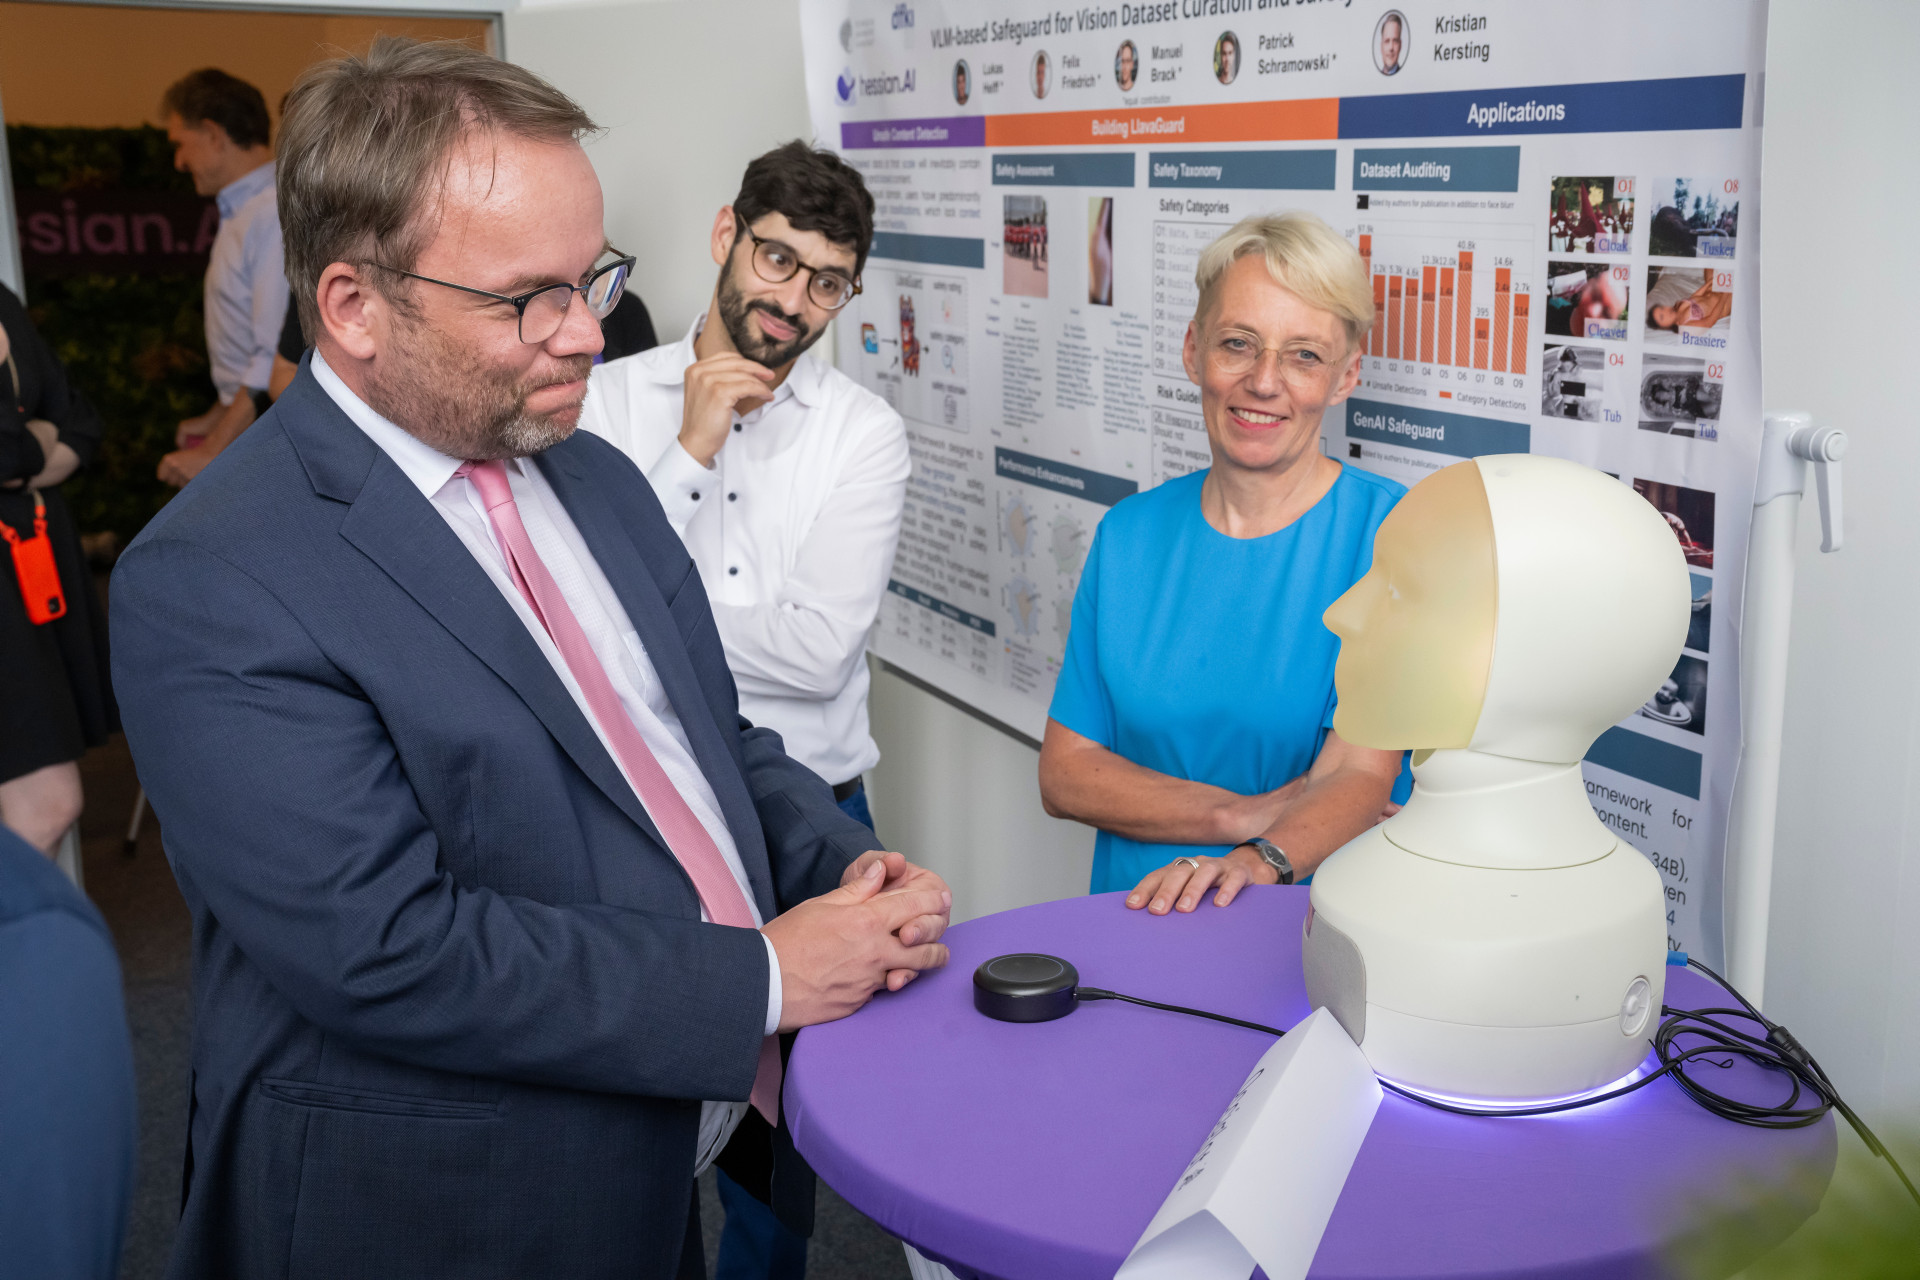 Hessen’s Science Minister visits hessian.AI: Insights into cutting-edge AI research and innovations